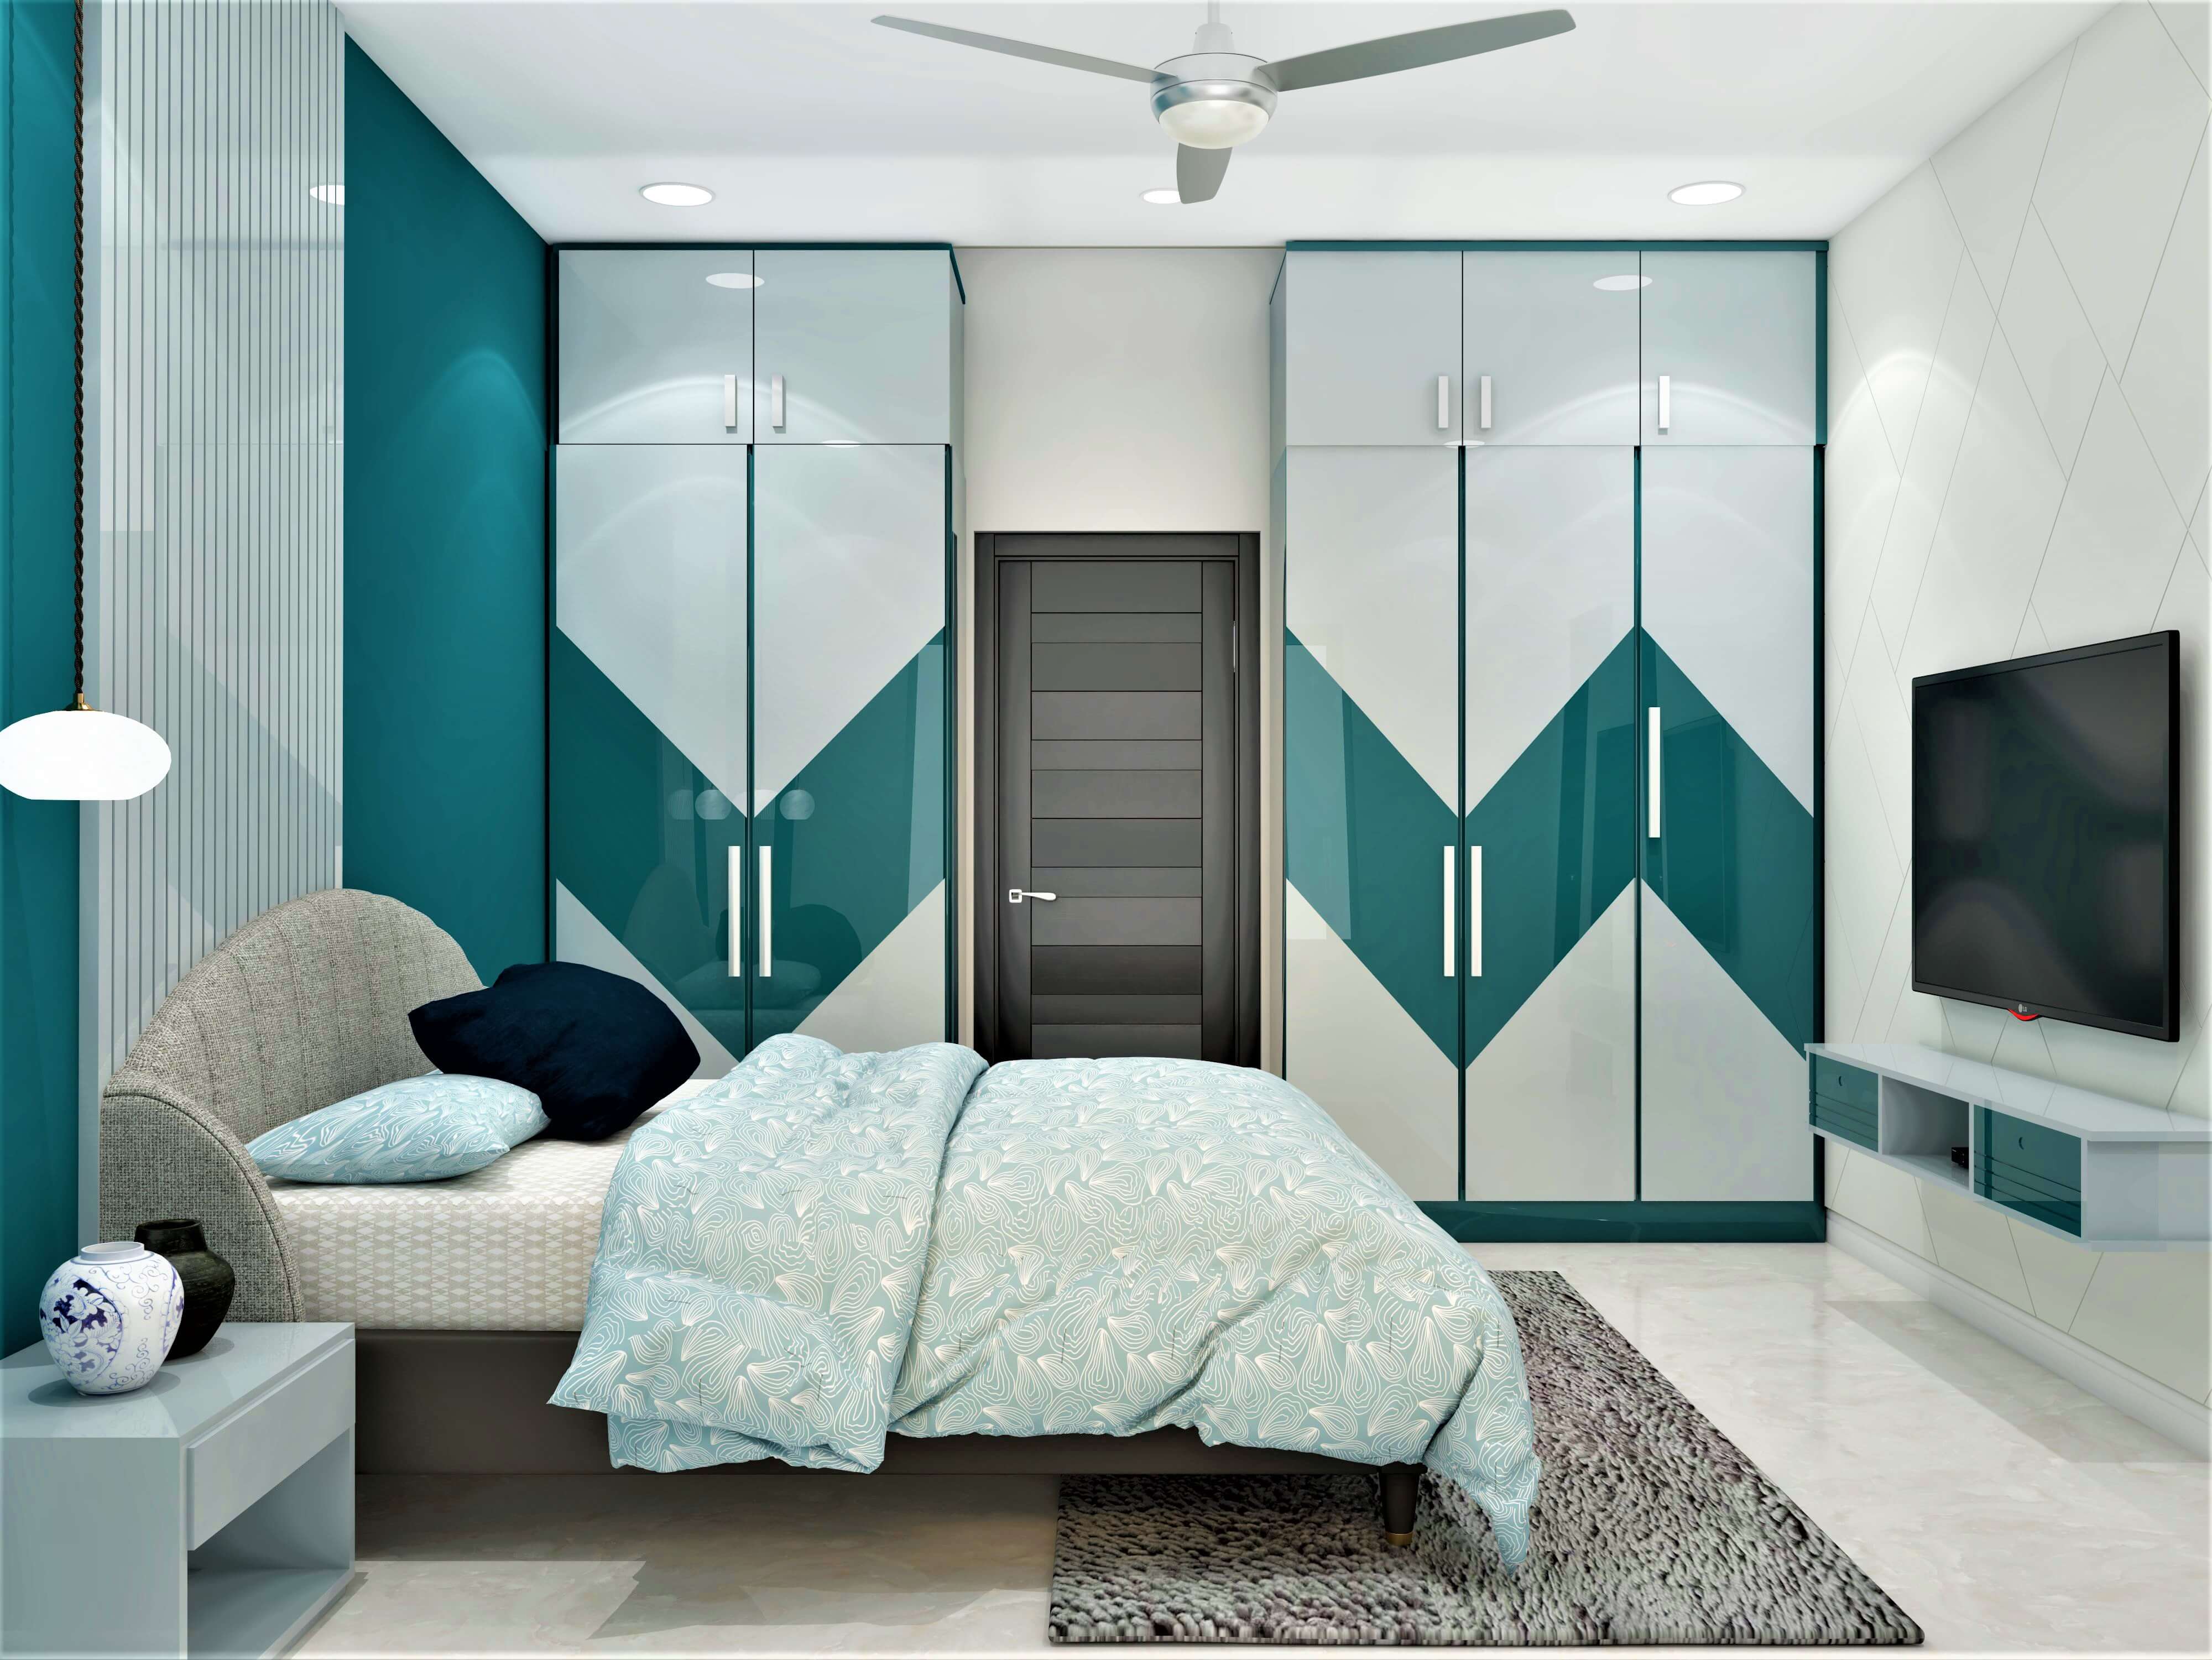 Contemporary master bedroom design with a modular wardrobe - Beautiful Homes